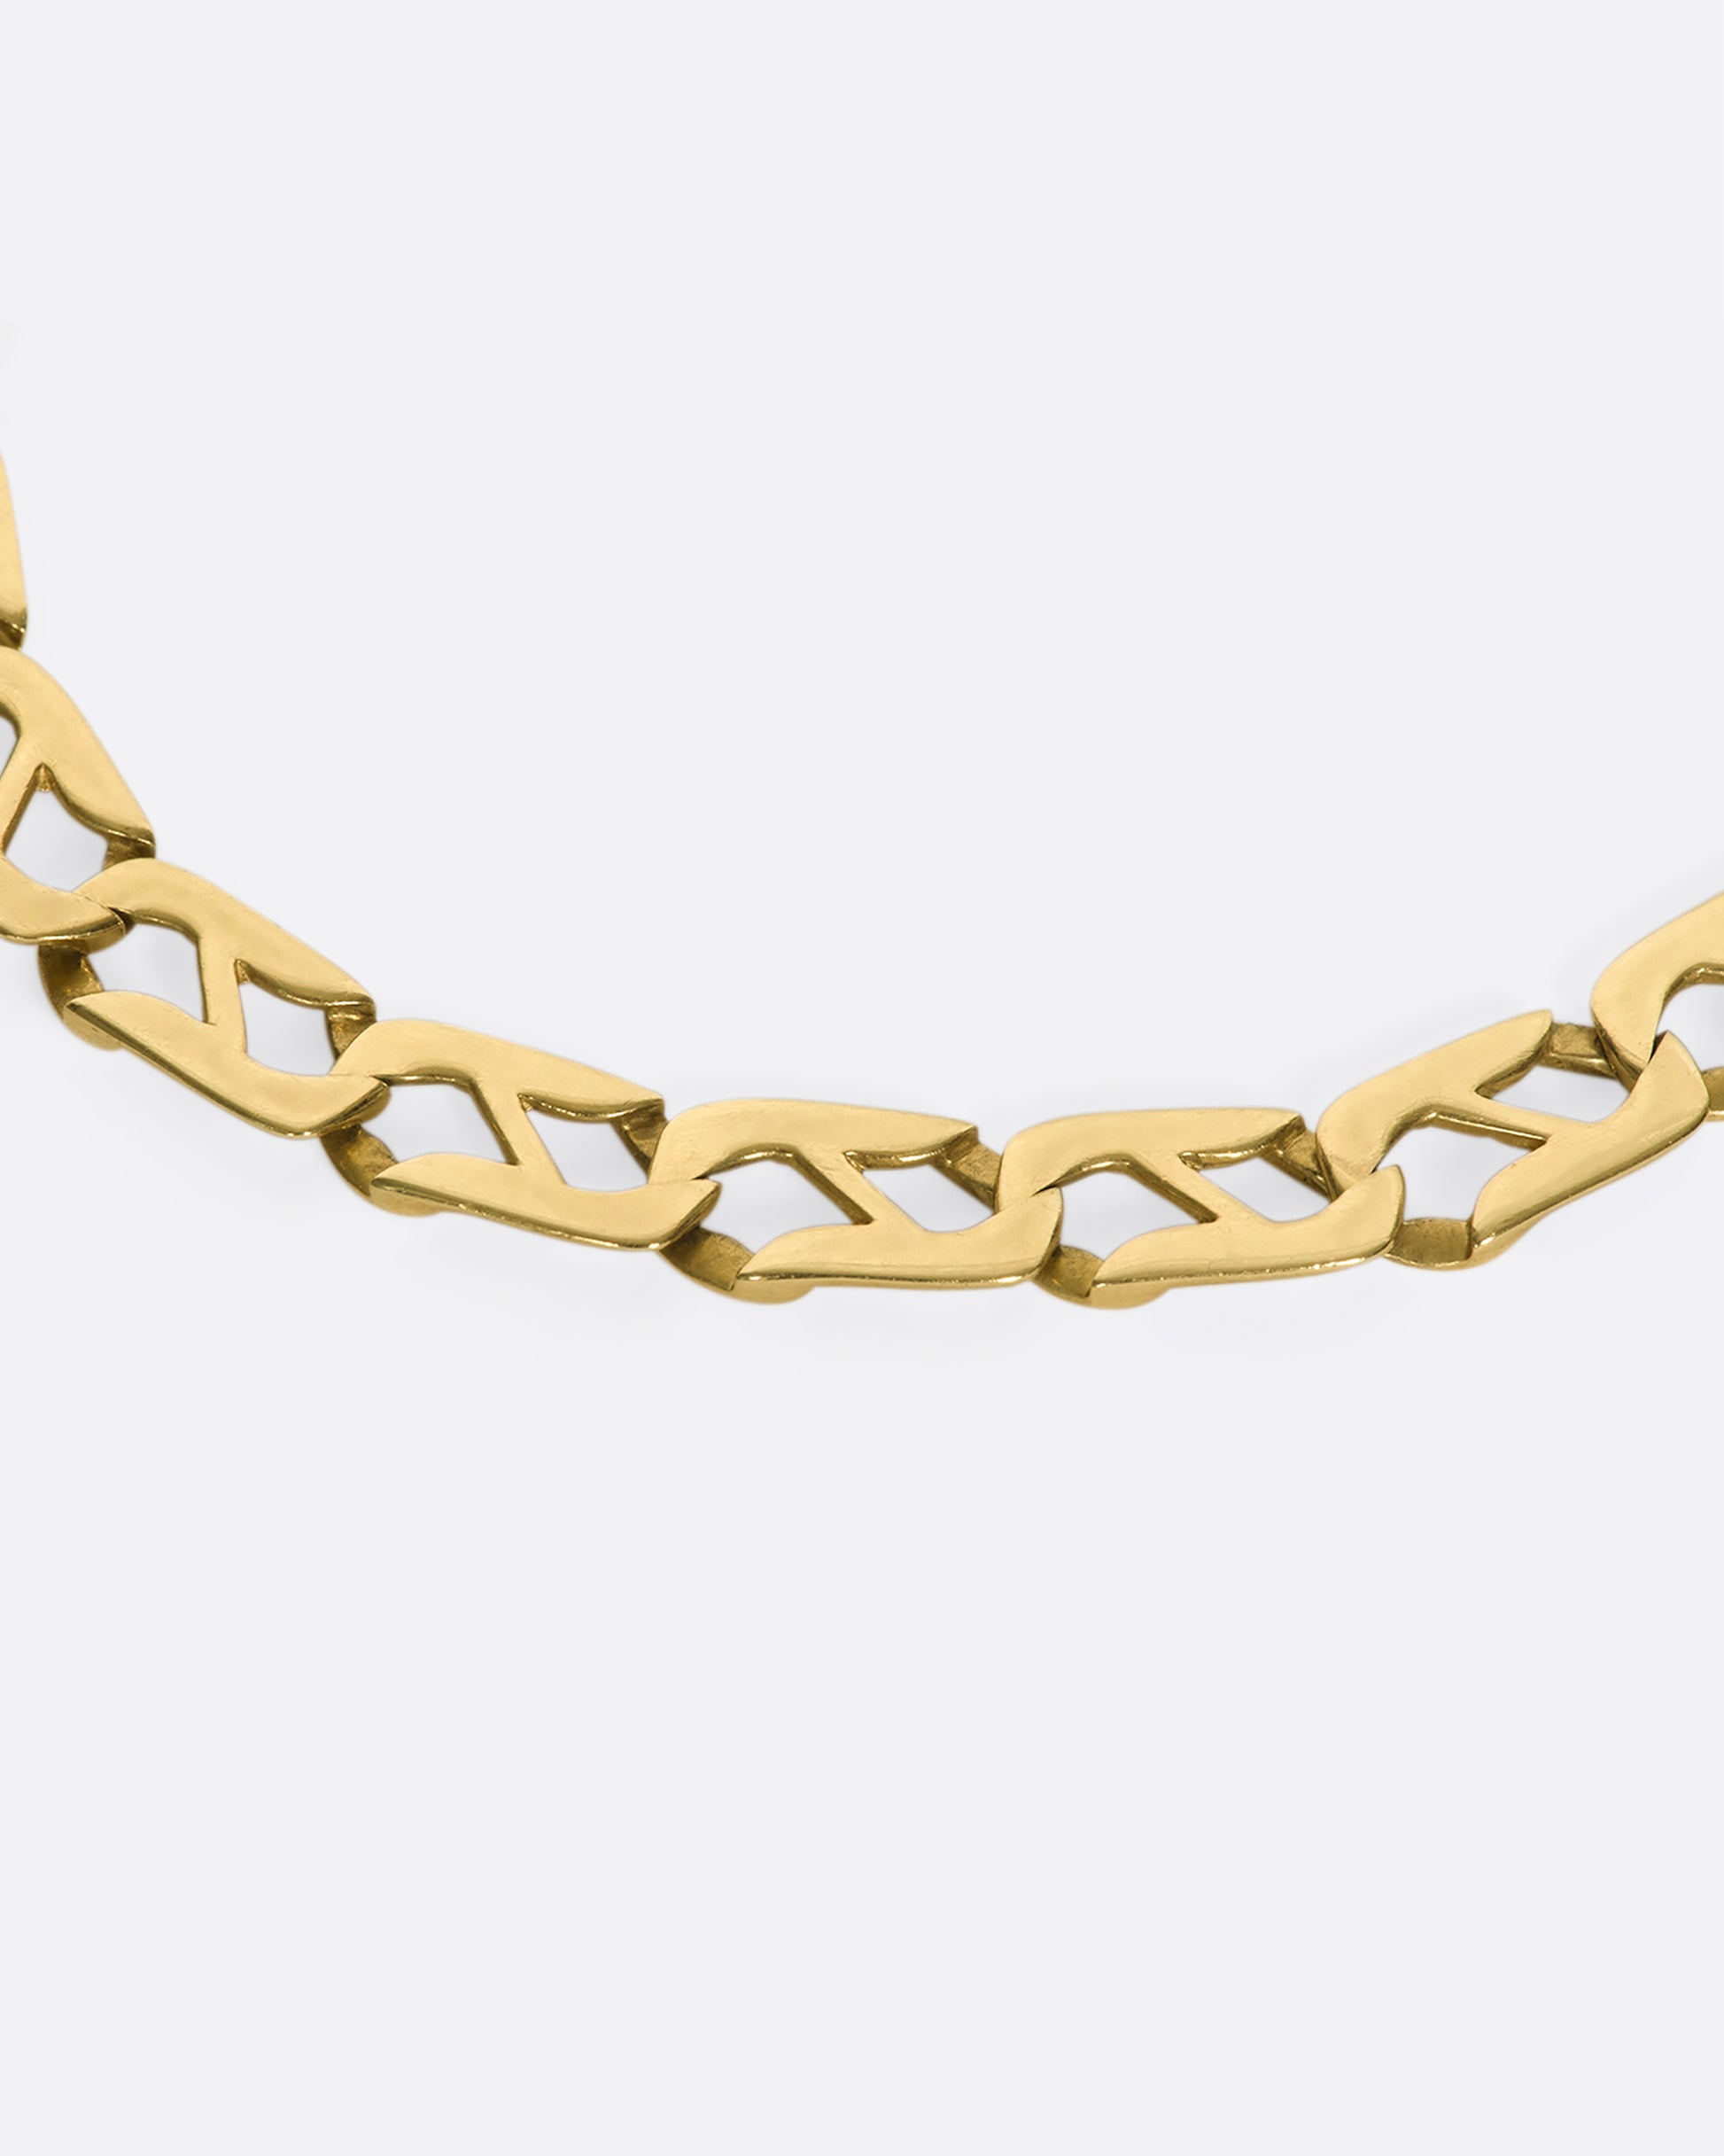 A vintage 14k gold flat mariner chain bracelet that's smooth on one side and textured on the other